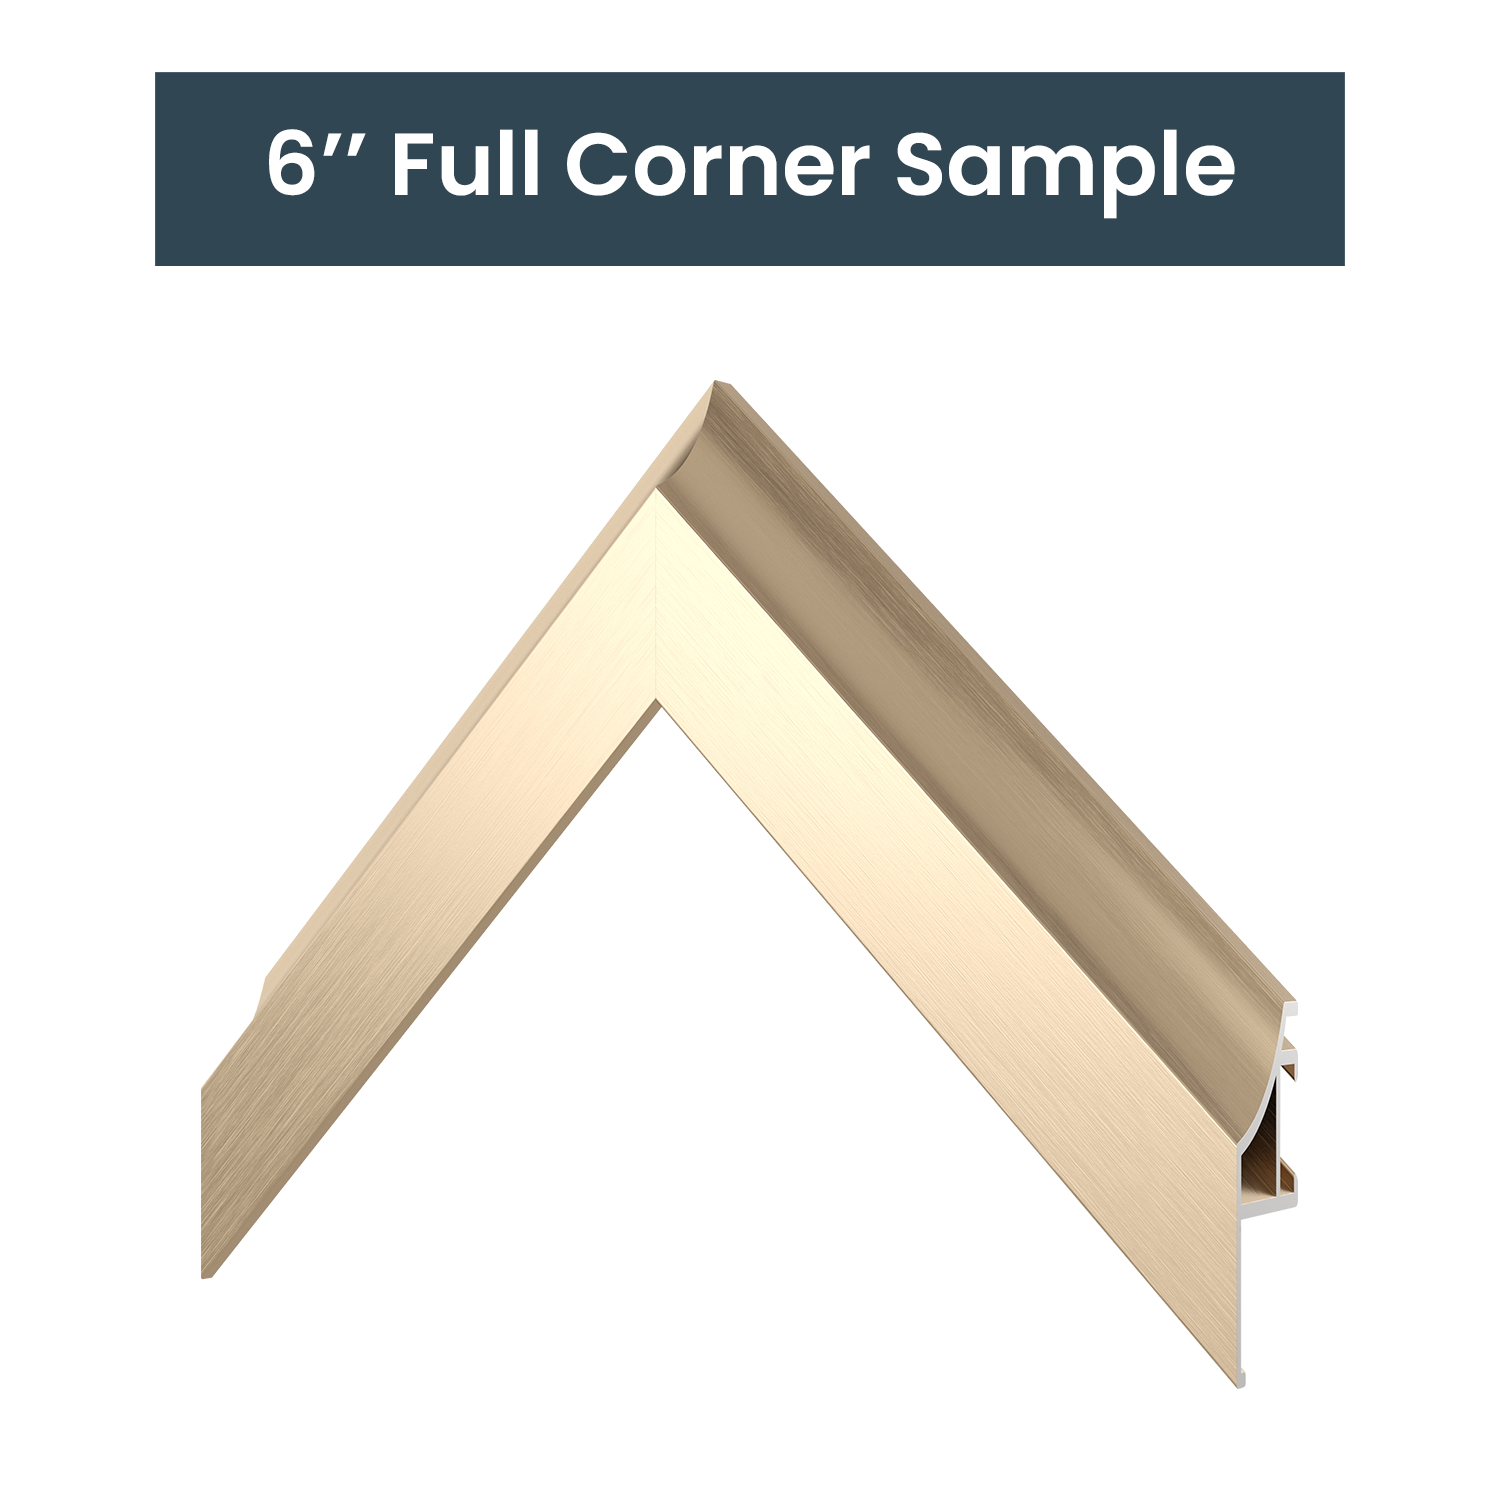 SAMPLE - Pale Gold Alloy - Profile: Scoop